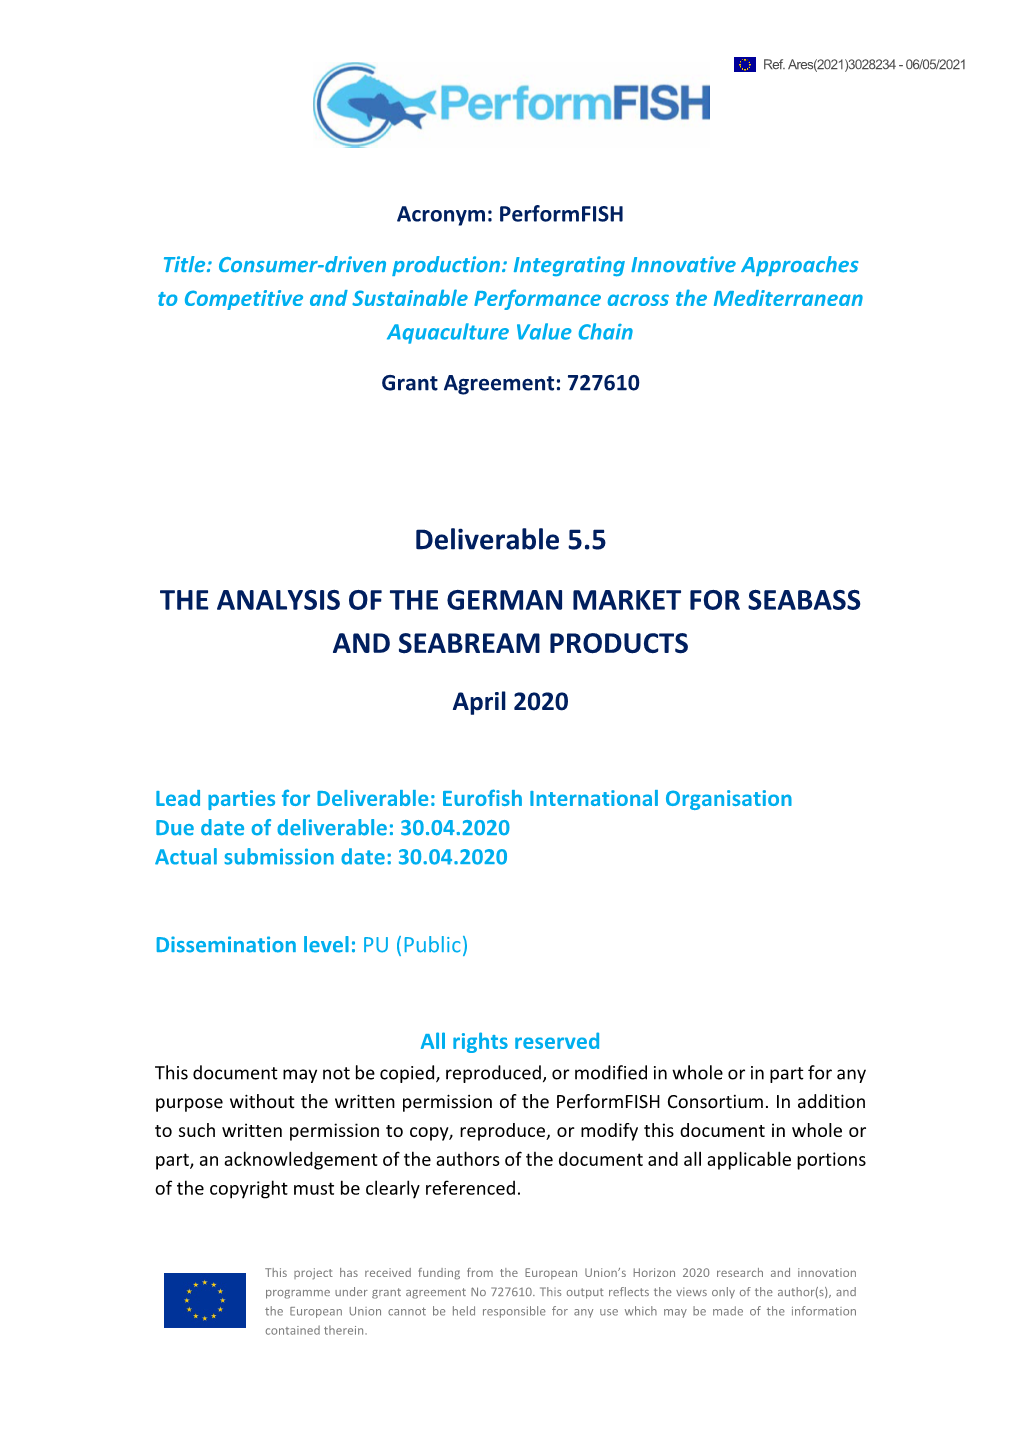 Analysis of the German Market for Seabass and Seabream Products